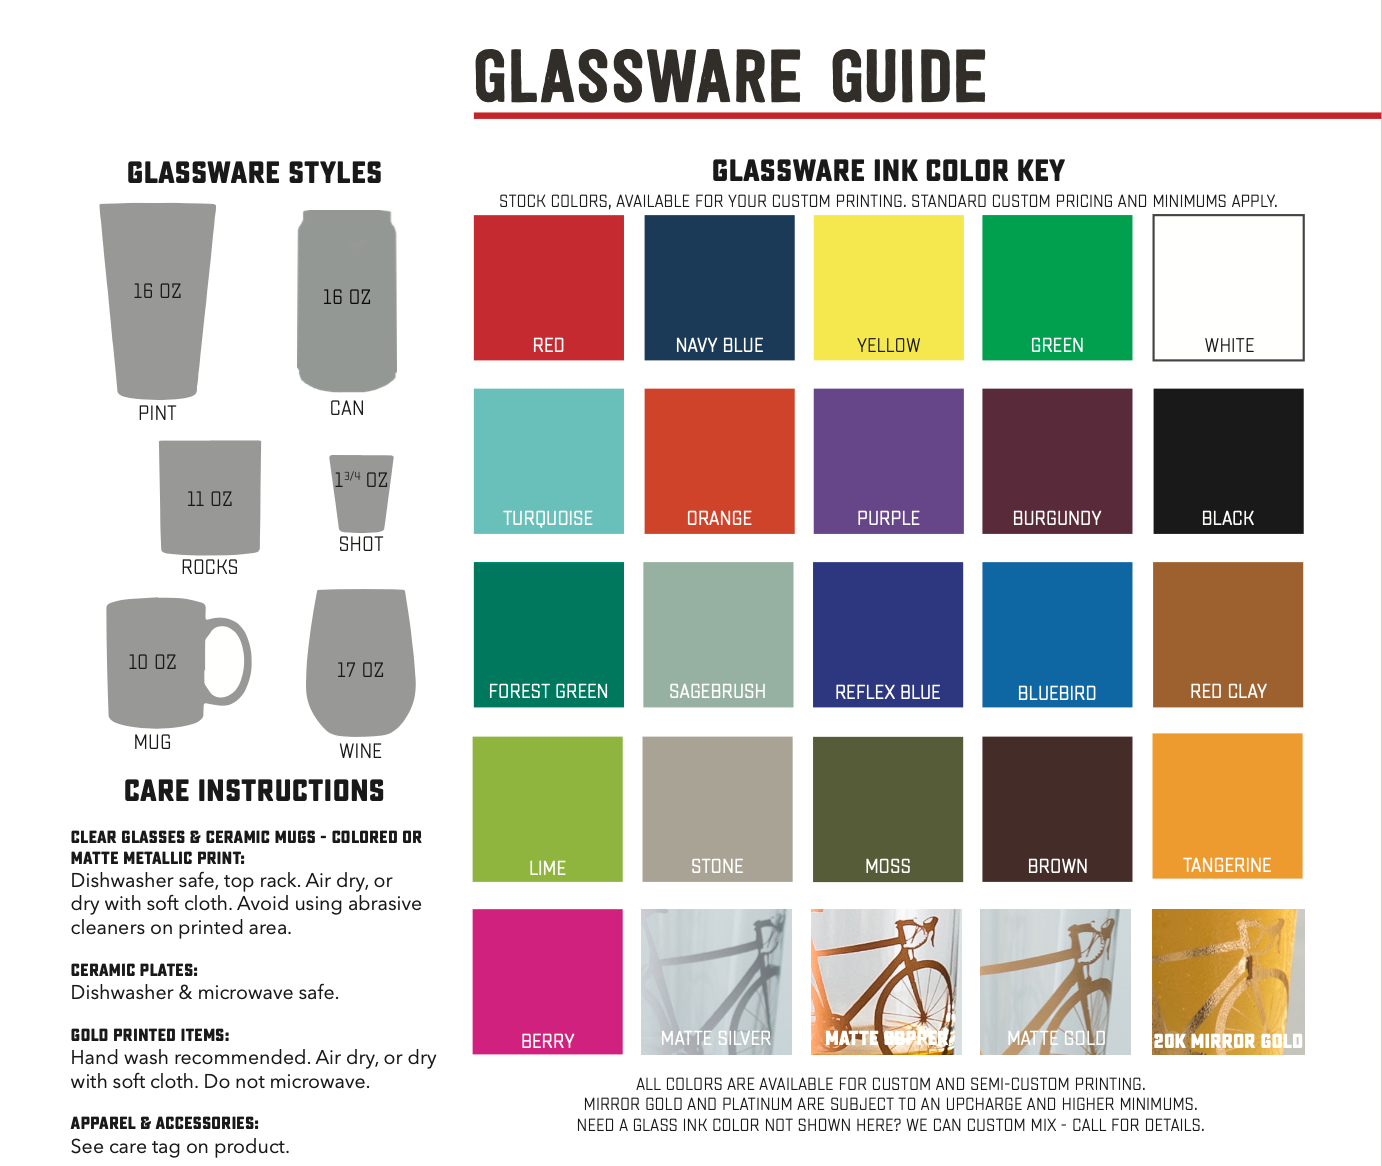 Glassware guide, styes and ink color key